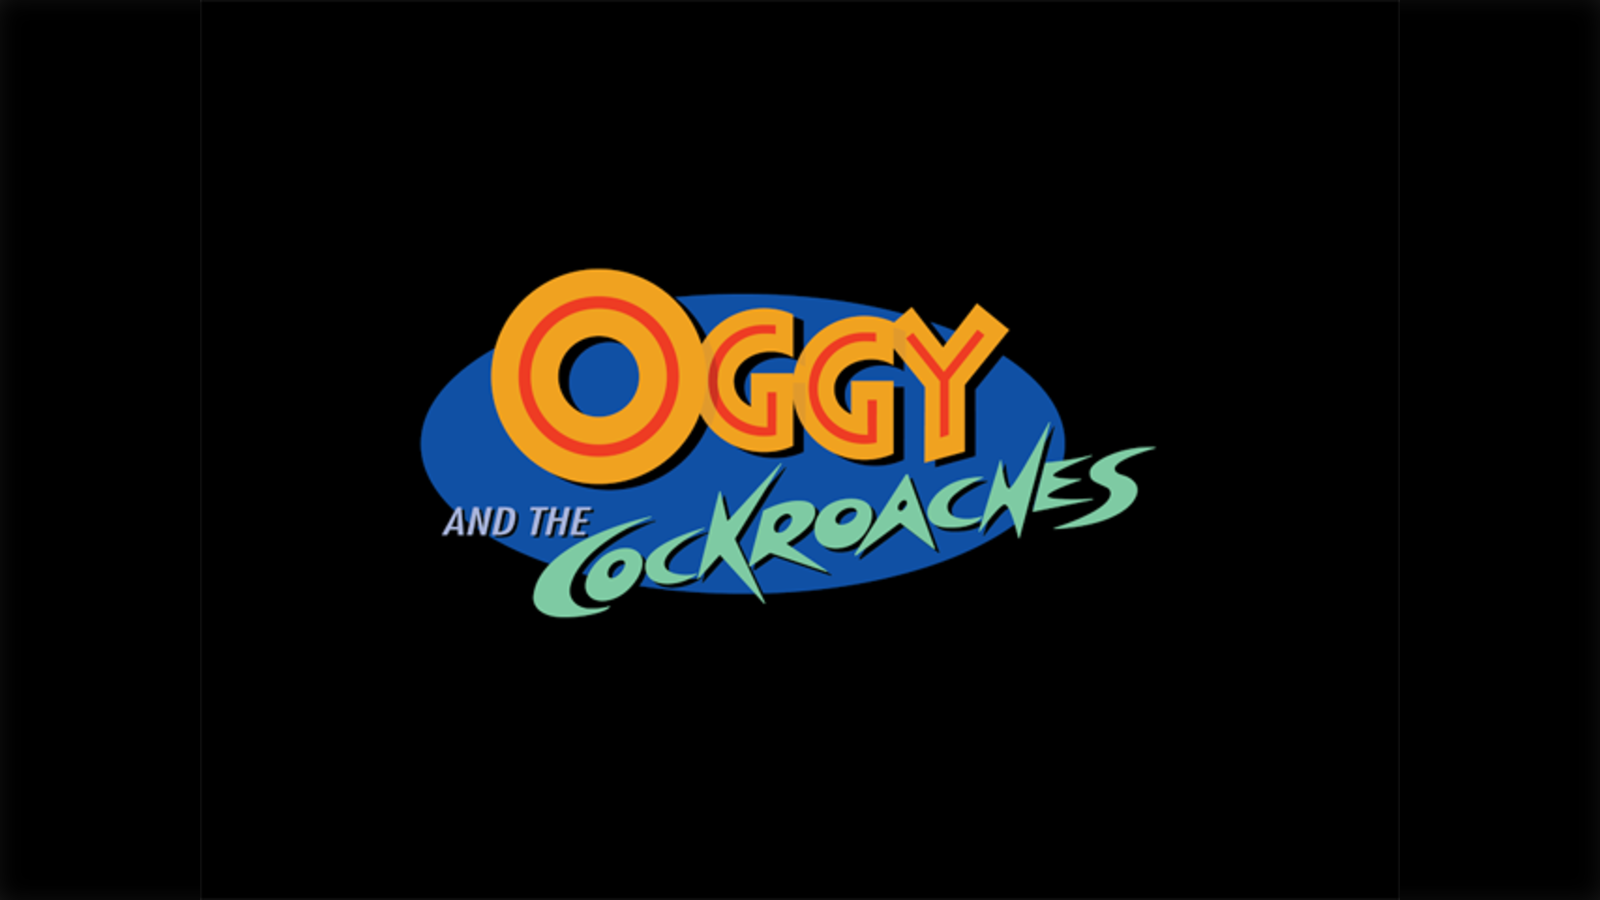 Oggy and the Cockroaches logo 3d model